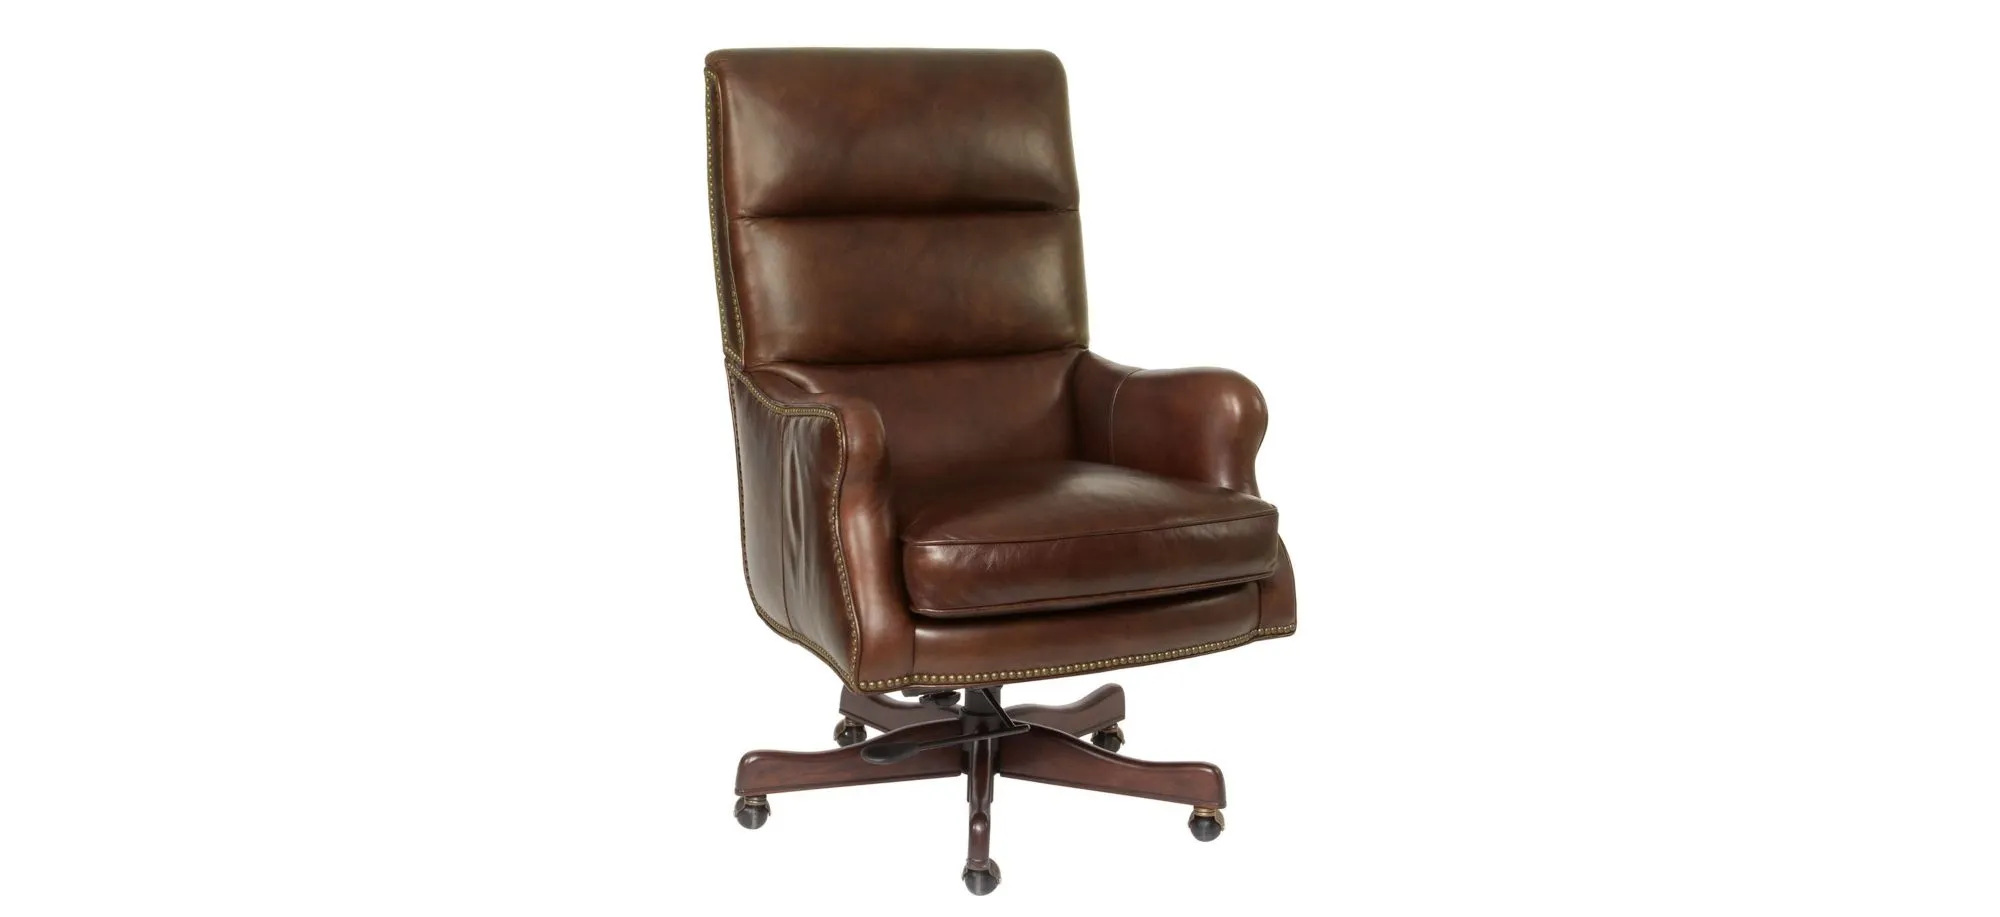 Victoria Executive Swivel Tilt Chair in Brown by Hooker Furniture